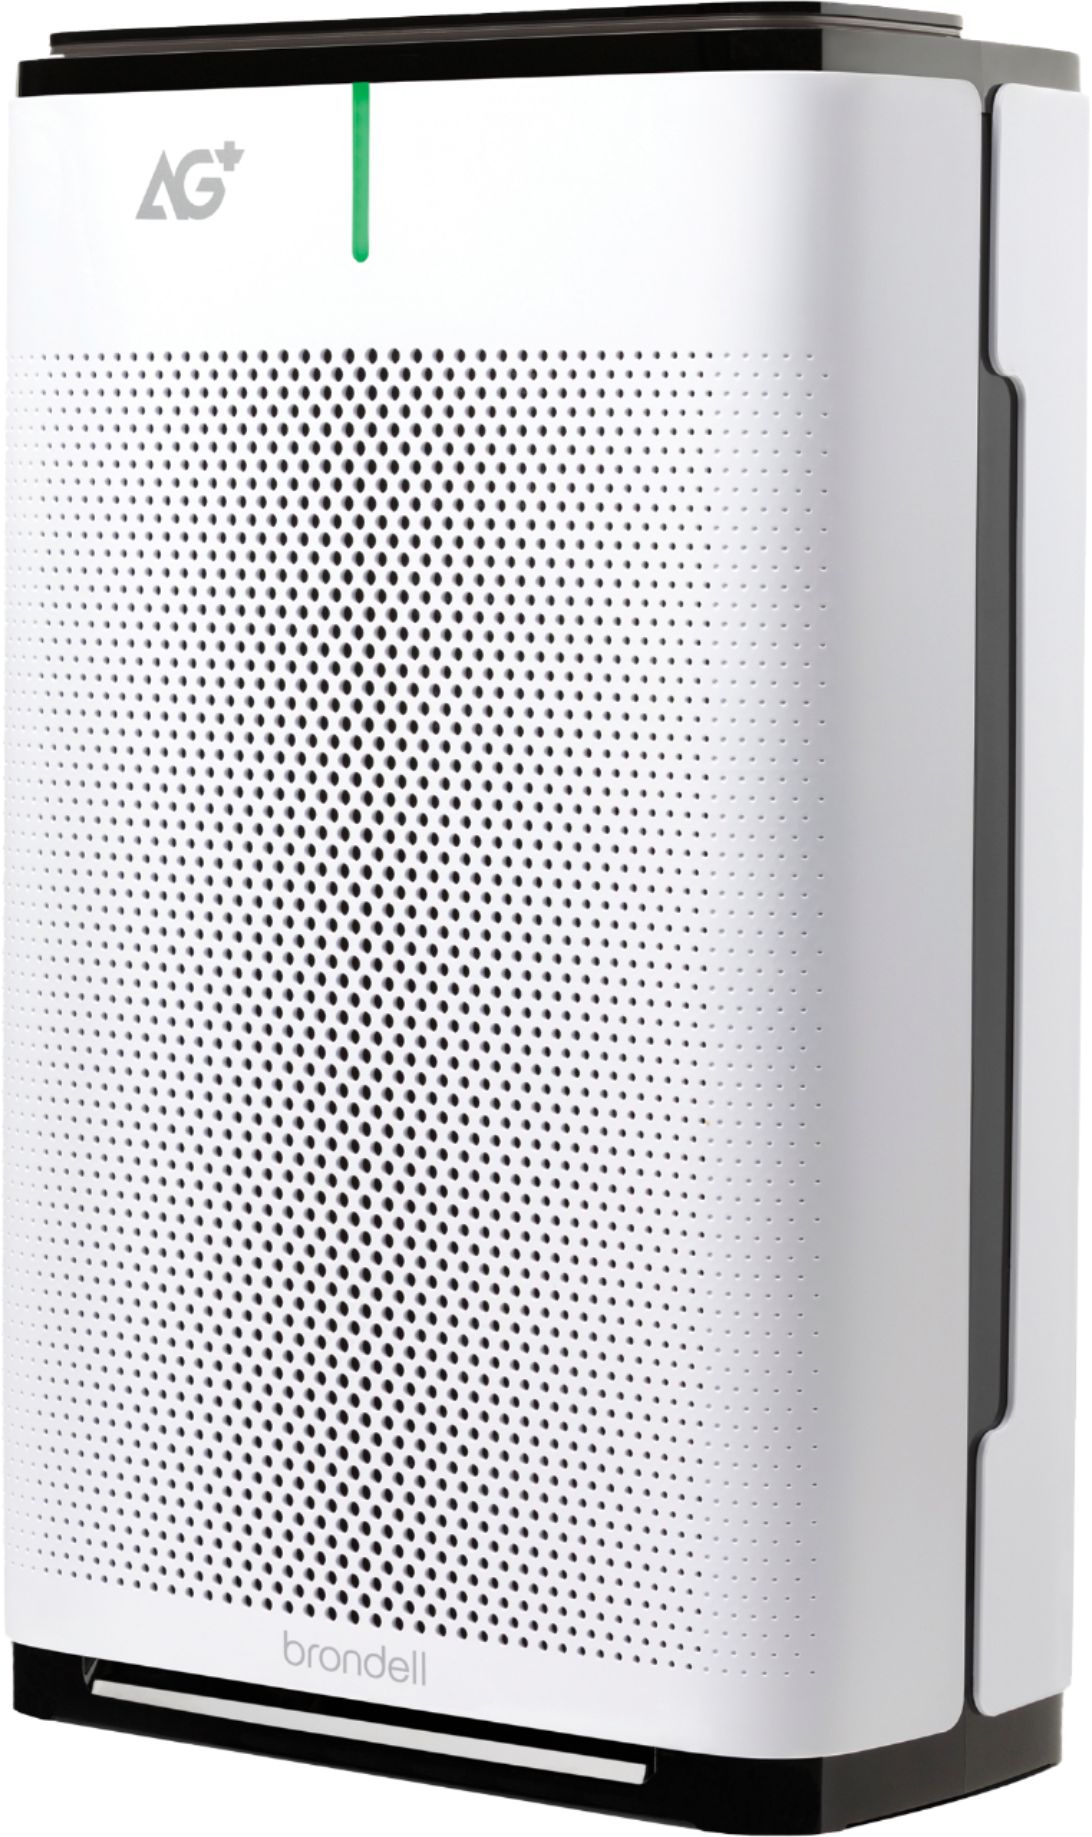 Angle View: Brondell Pro Sanitizing Air Purifier with AG+ Technology - White